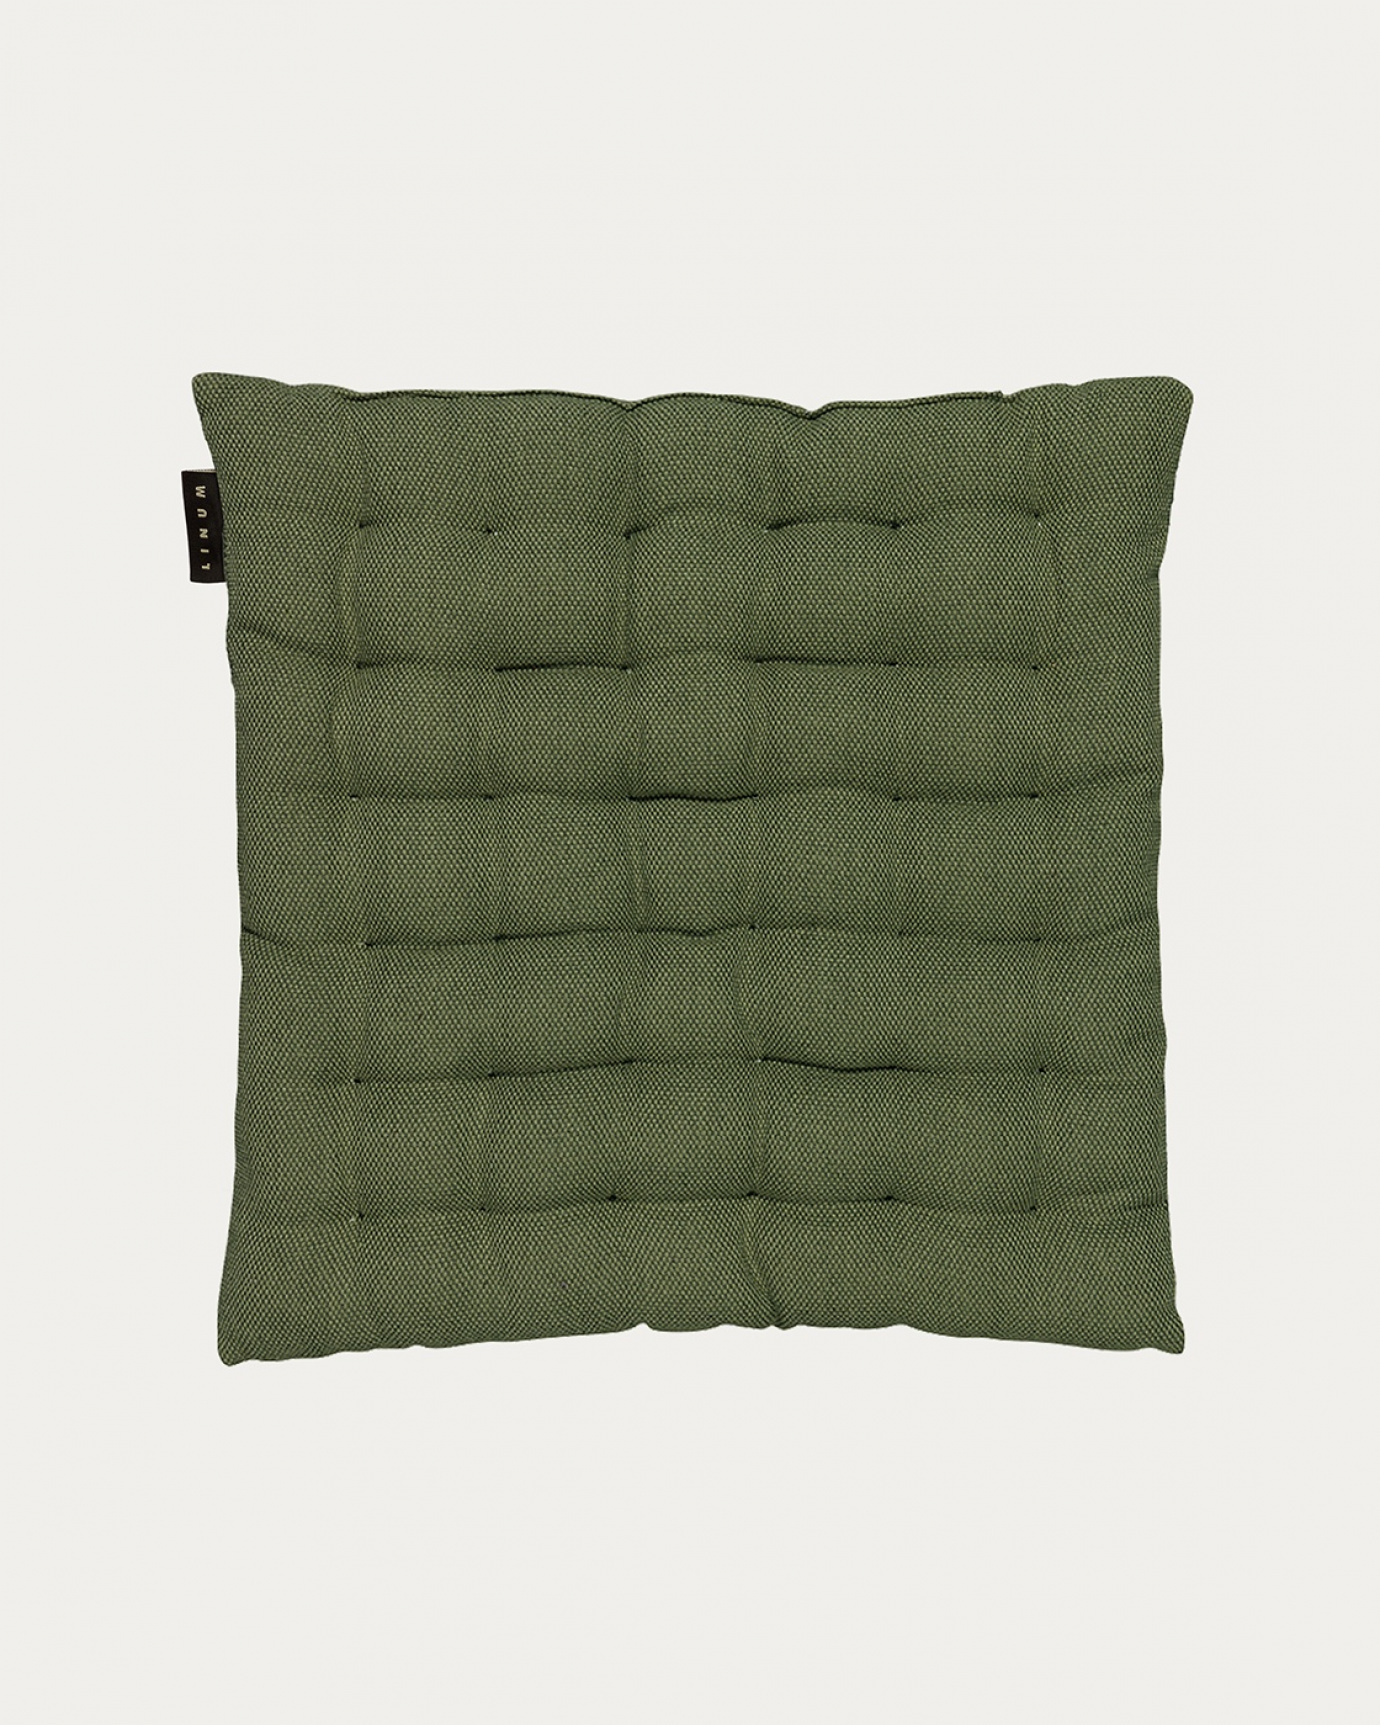 Product image dark olive green PEPPER seat cushion made of soft cotton with recycled polyester filling from LINUM DESIGN. Size 40x40 cm.